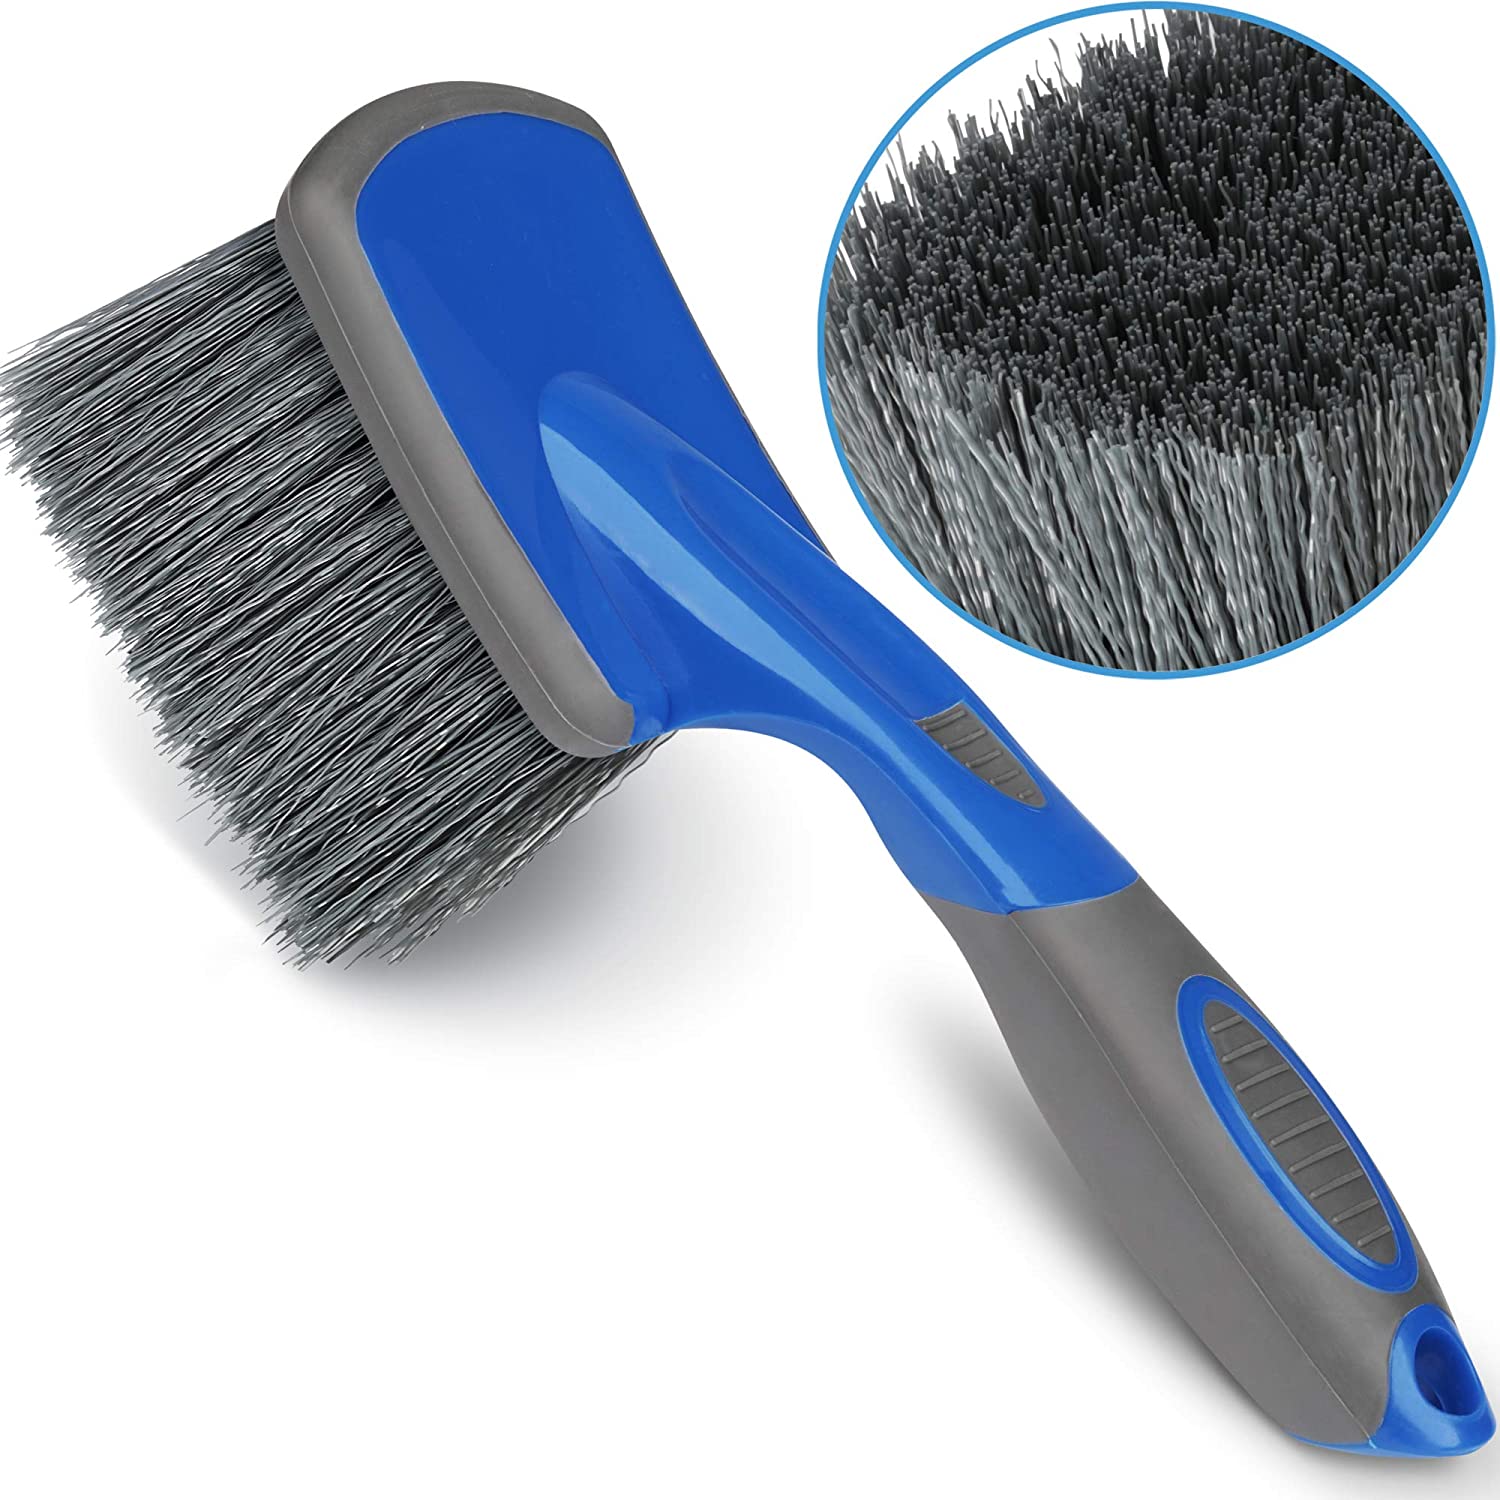 Car Tire Rim Brush Cleaning Kit Auto Wheel Cleaning Brush Auto Detailing  Tool